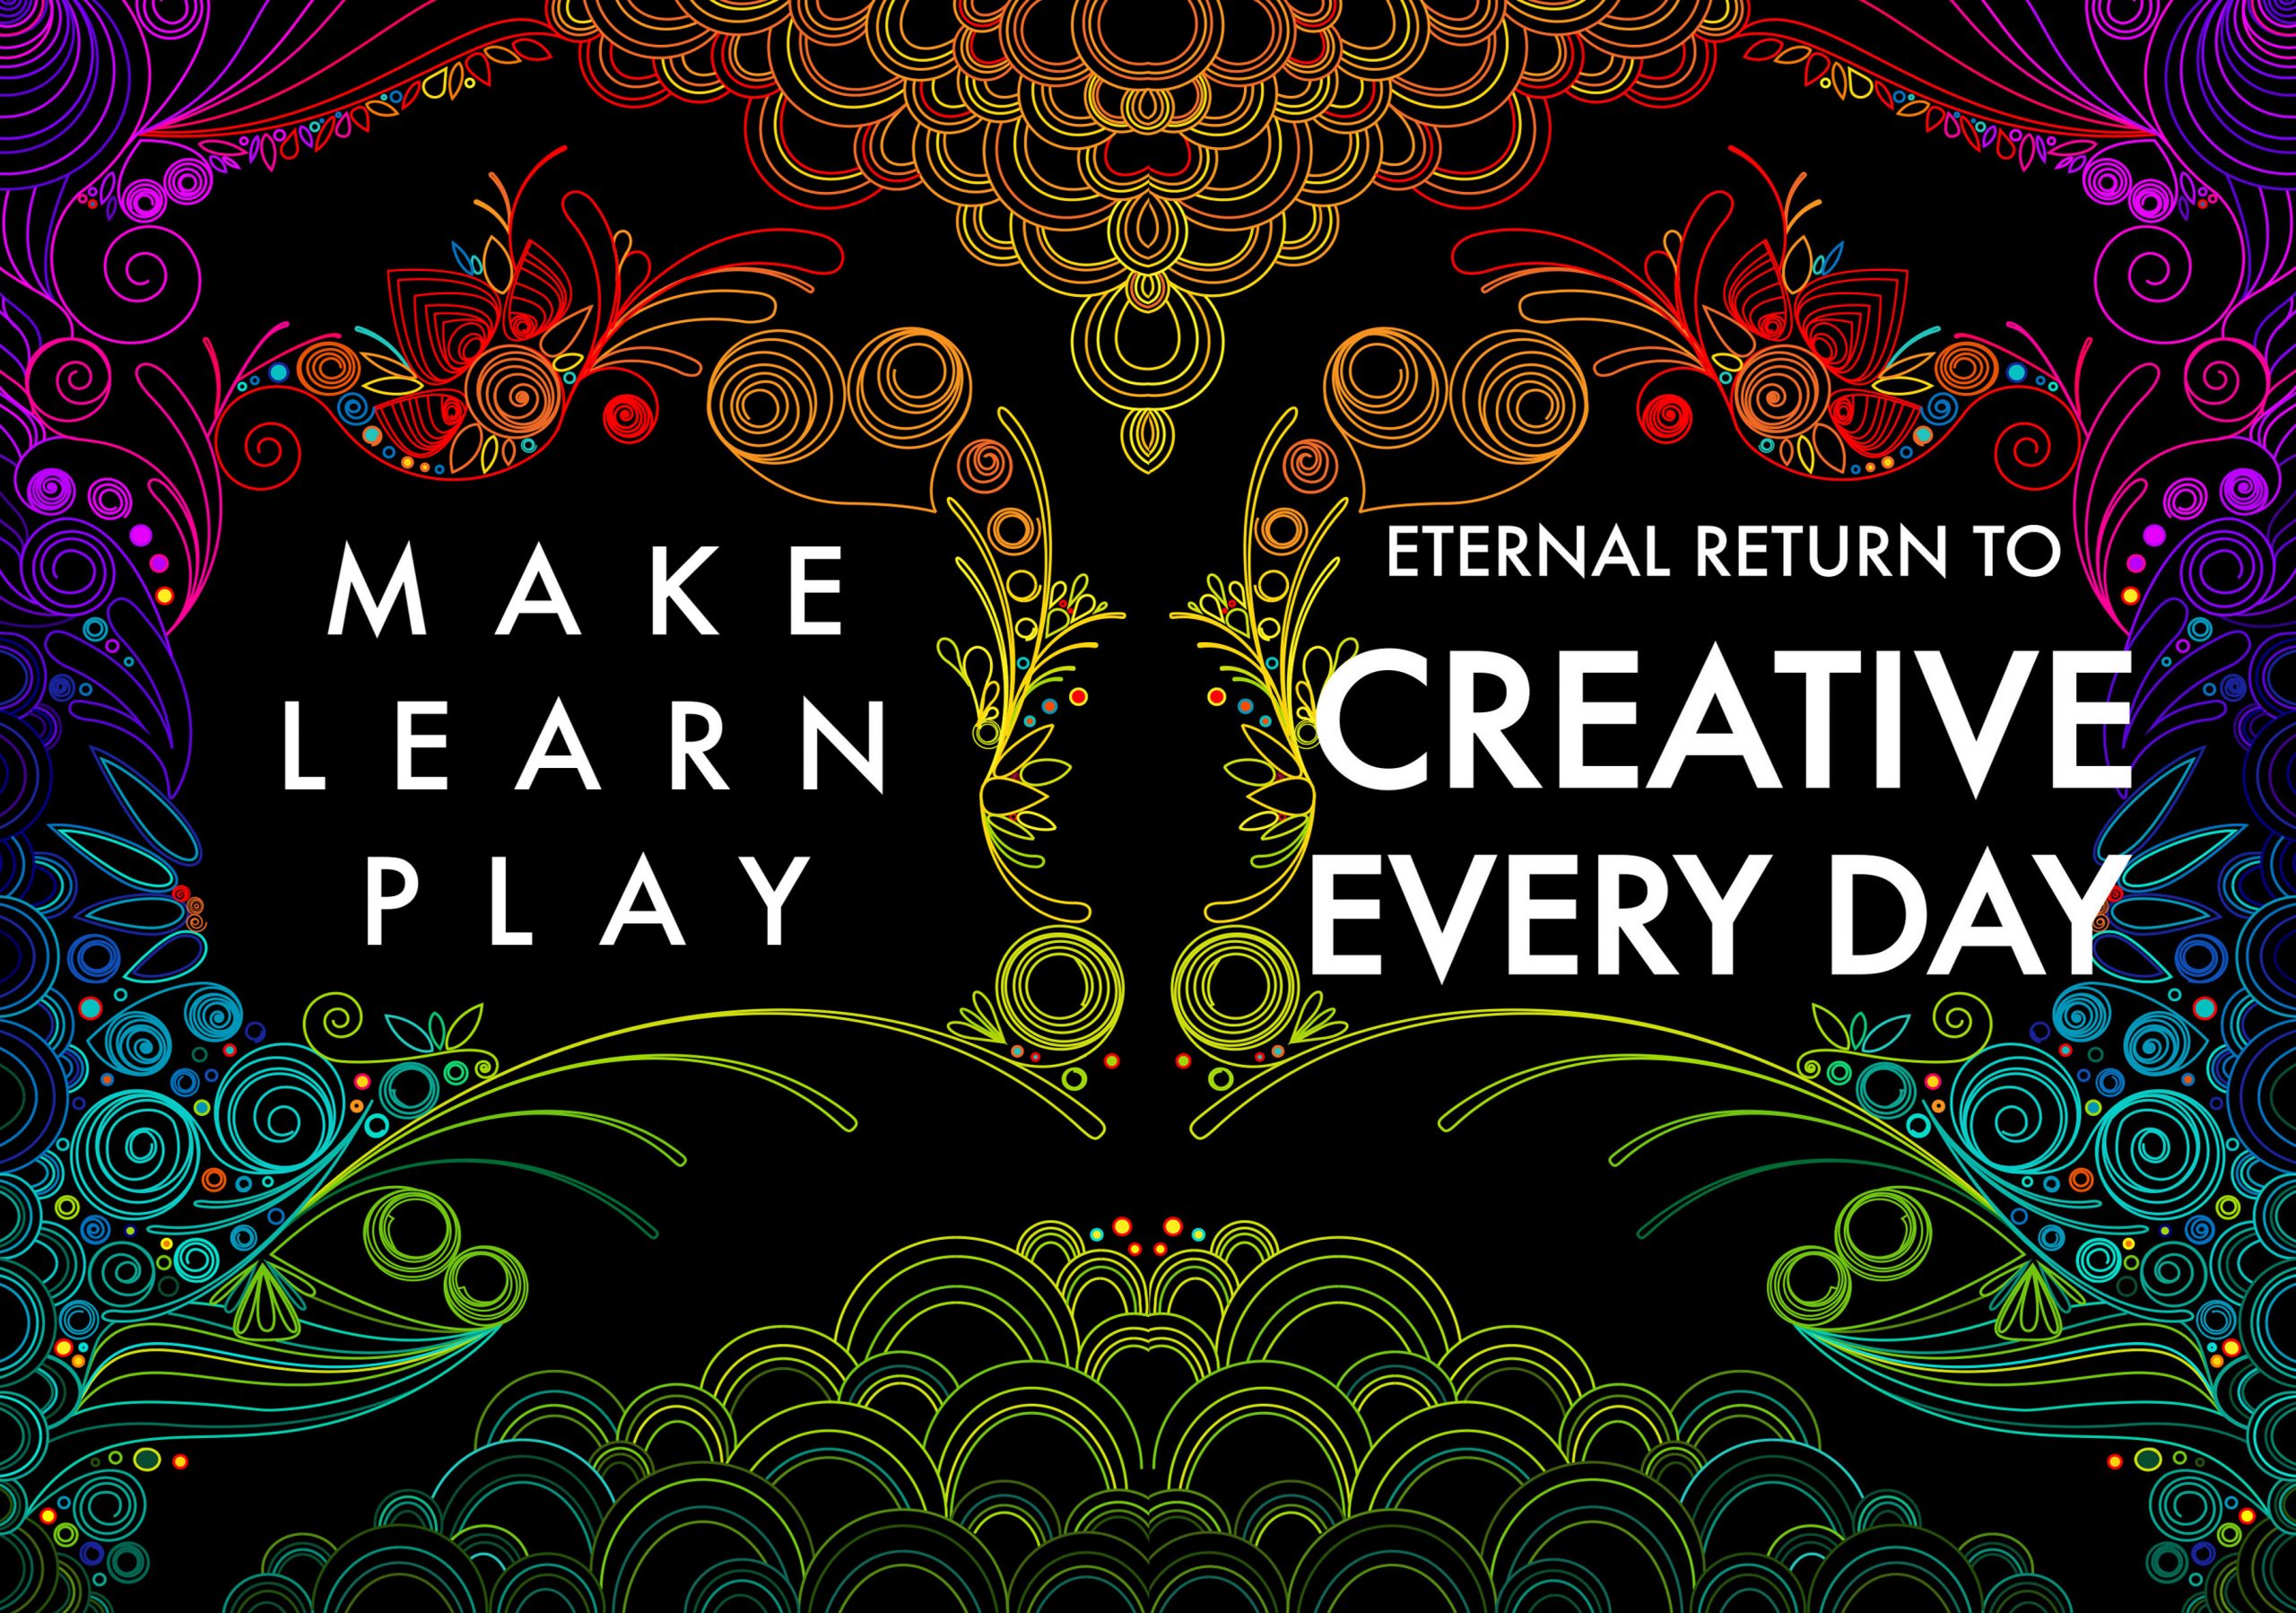 You Are Creative: CREATIVE EVERY DAY Flash Sale